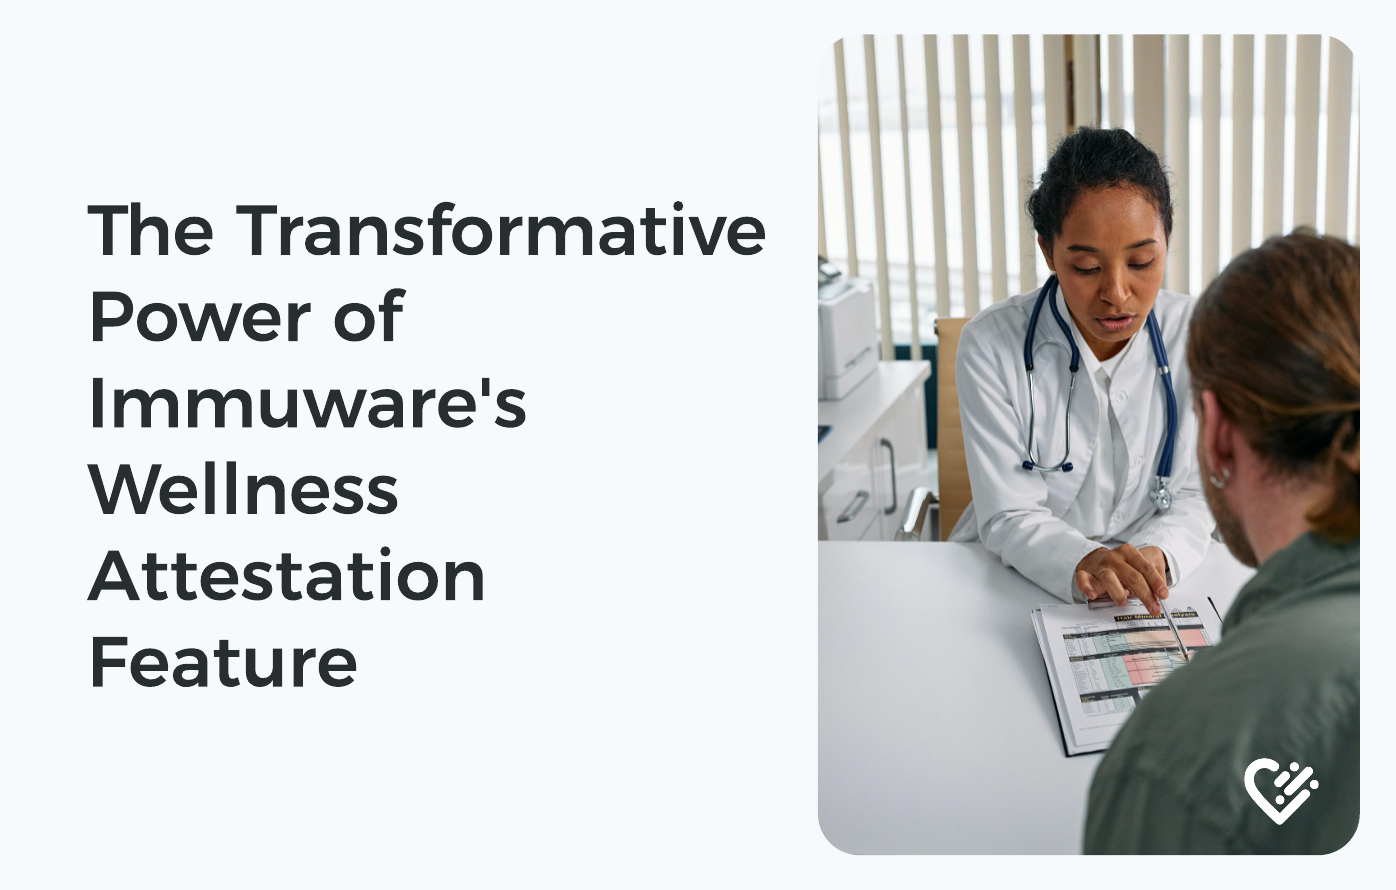 The Transformative Power of Immuware’s Wellness Attestation Feature